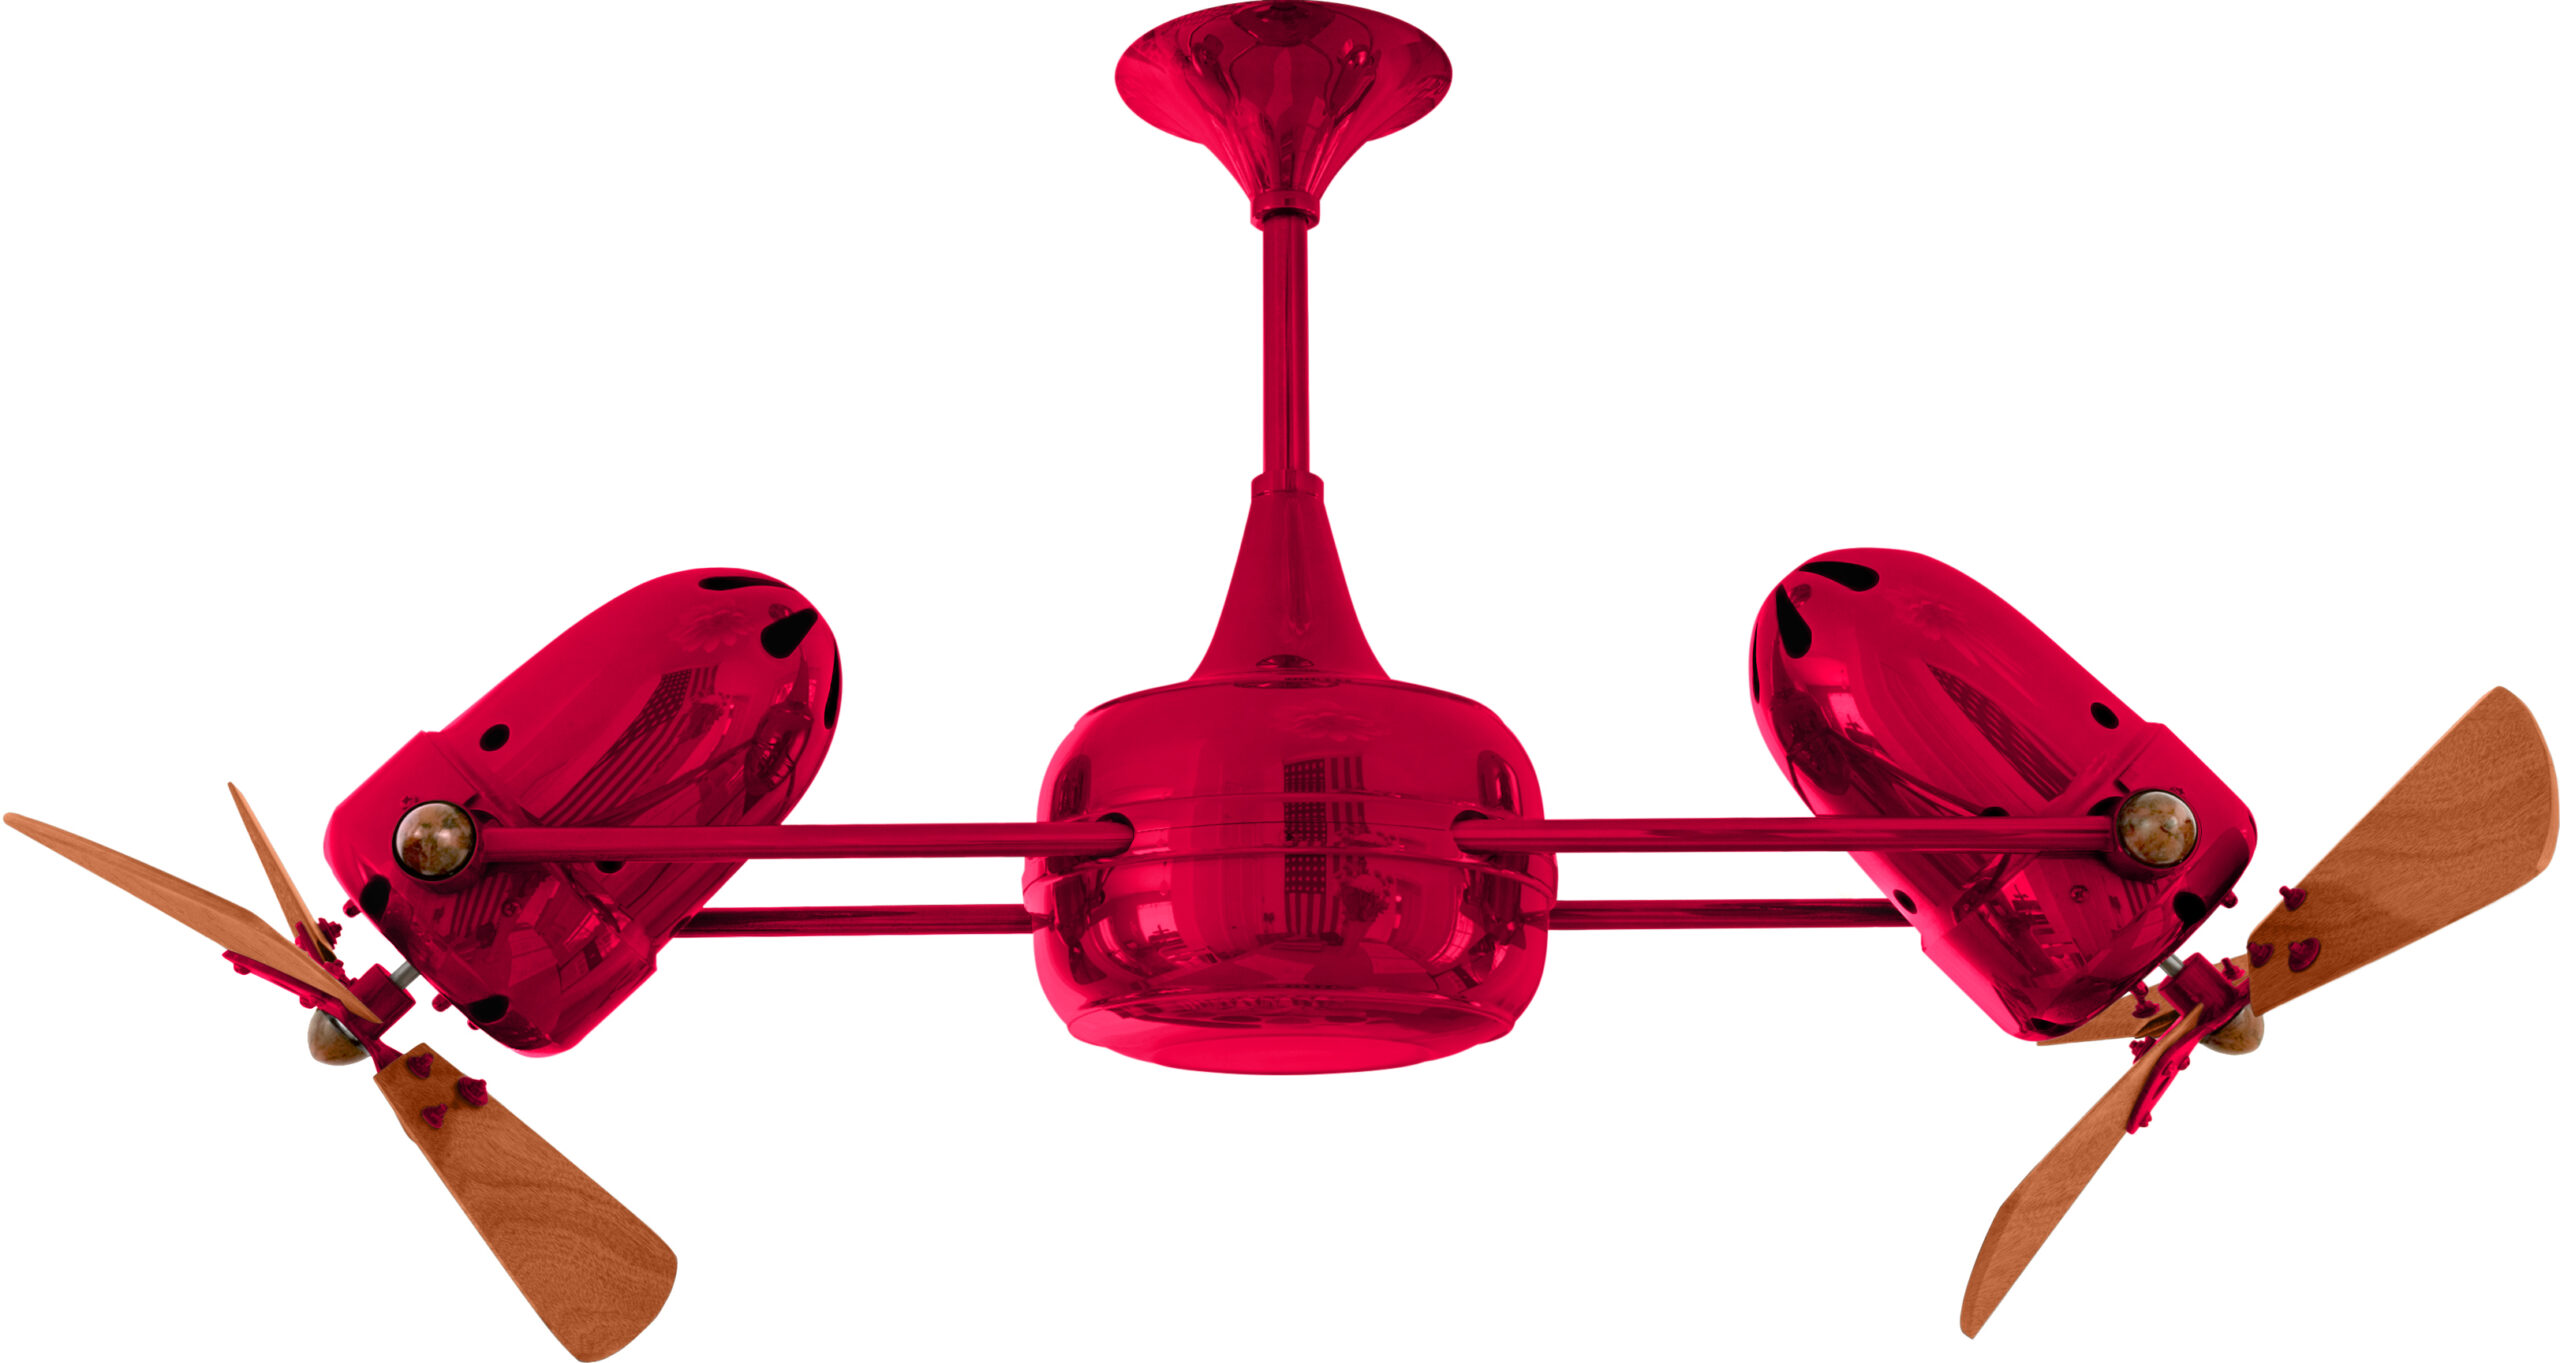 Duplo Dinamico rotational dual head ceiling fan in red / rubi finish with solid mahogany wood blades made by Matthews Fan Company.